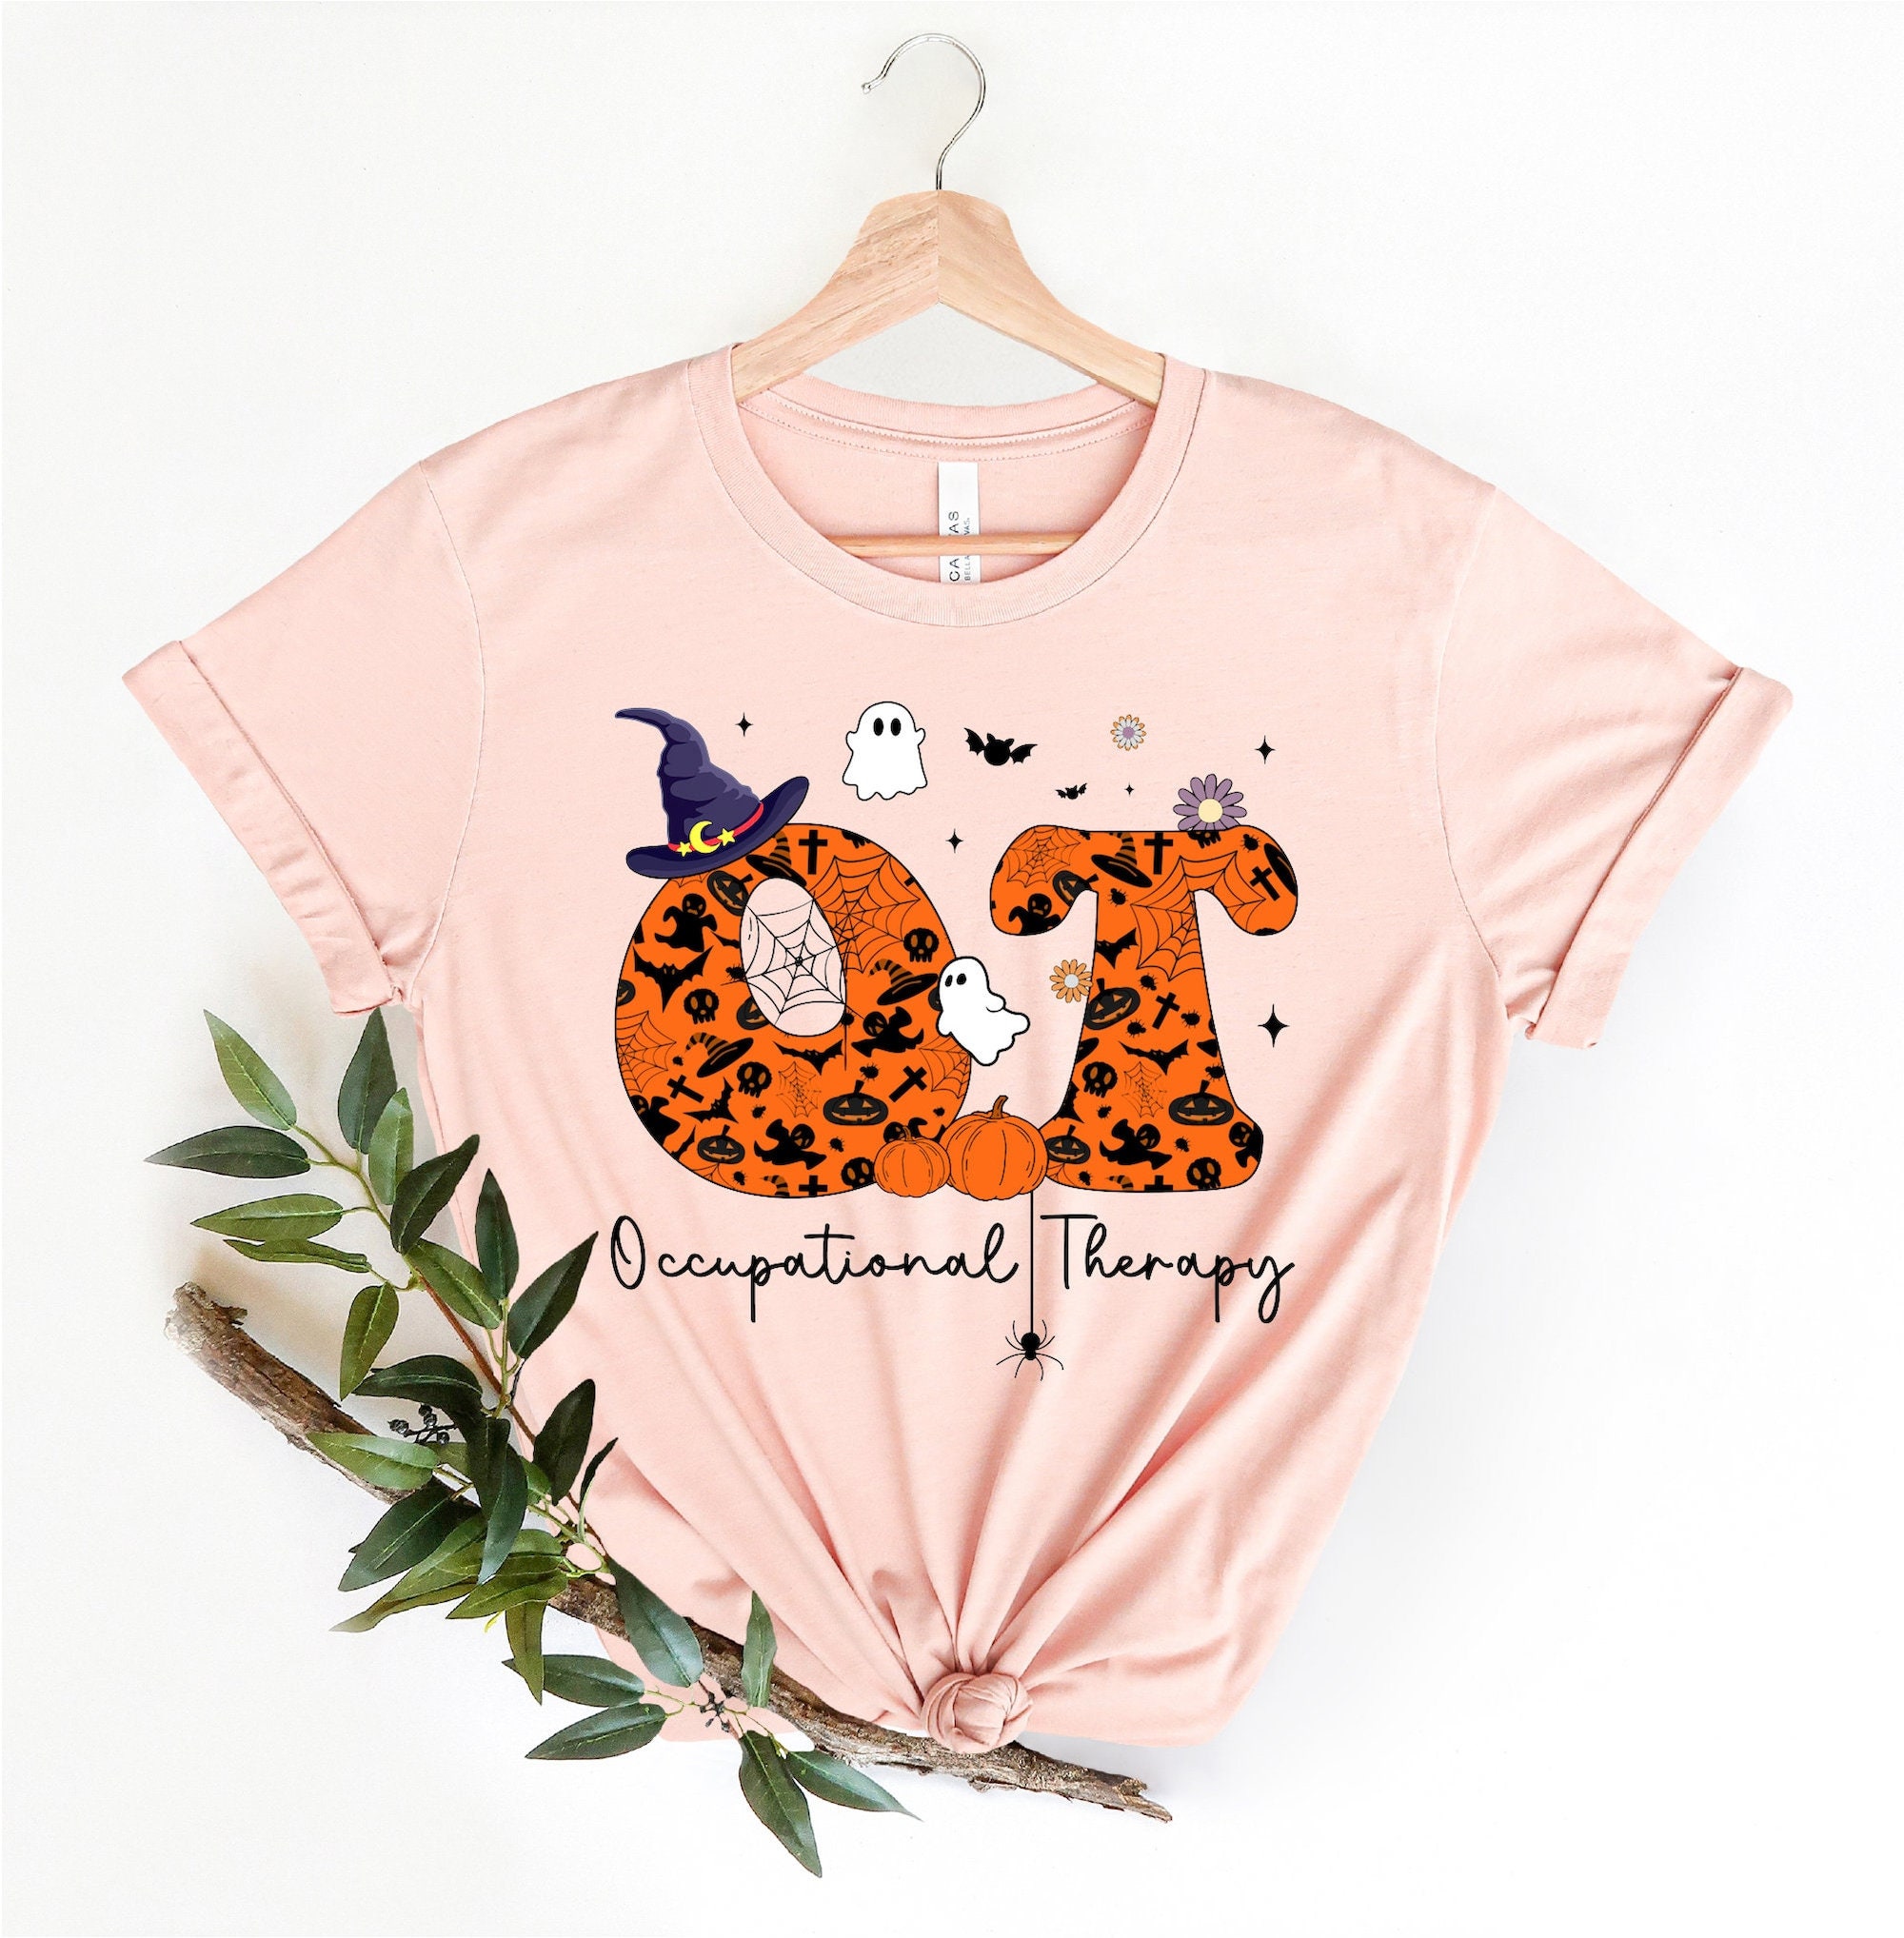 Discover Occupational Therapist Halloween Shirt, Spooky OT Shirt, Occupational Therapist Shirt, OT Shirt, Special Education Shirt, Therapist Shirt